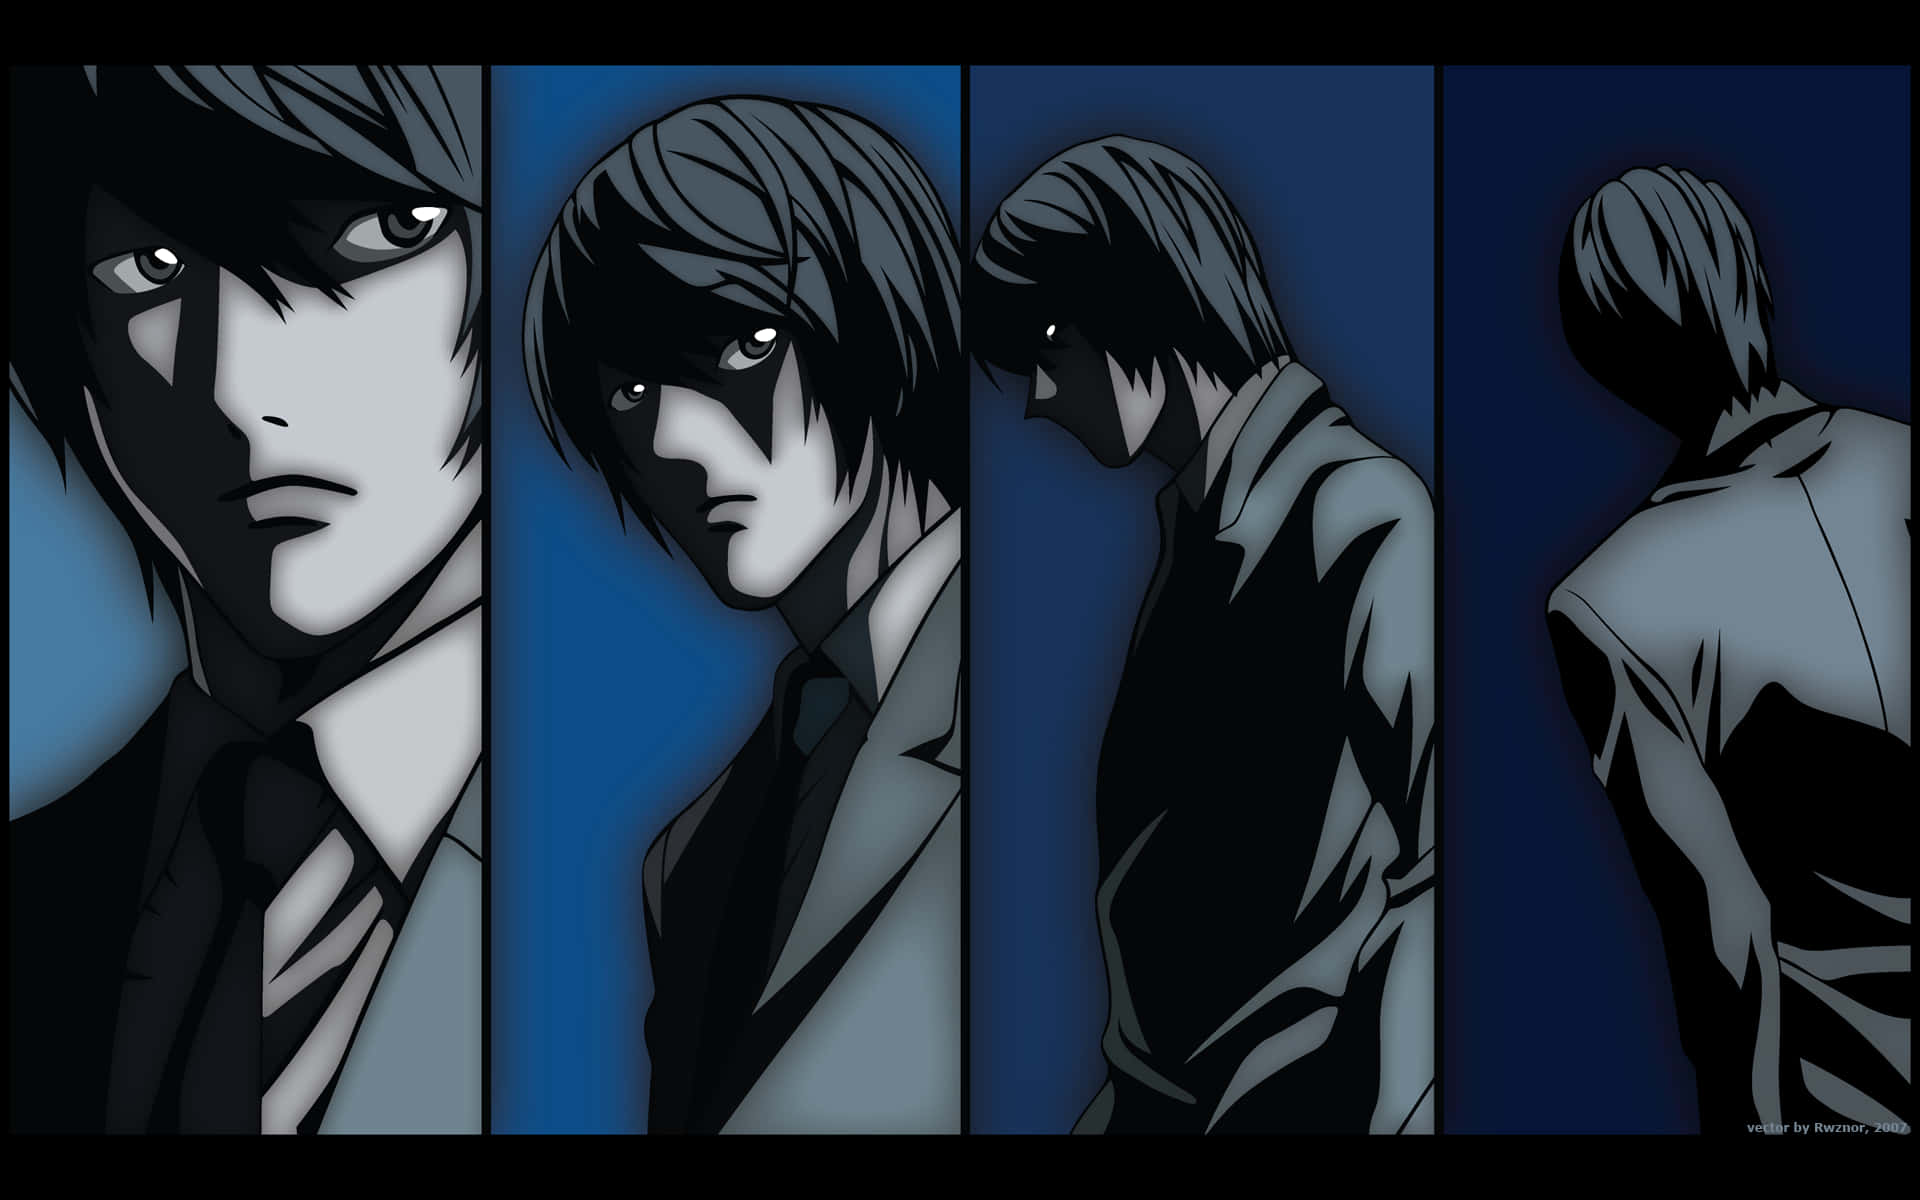 Light Yagami- Enter The World of "Death Note"